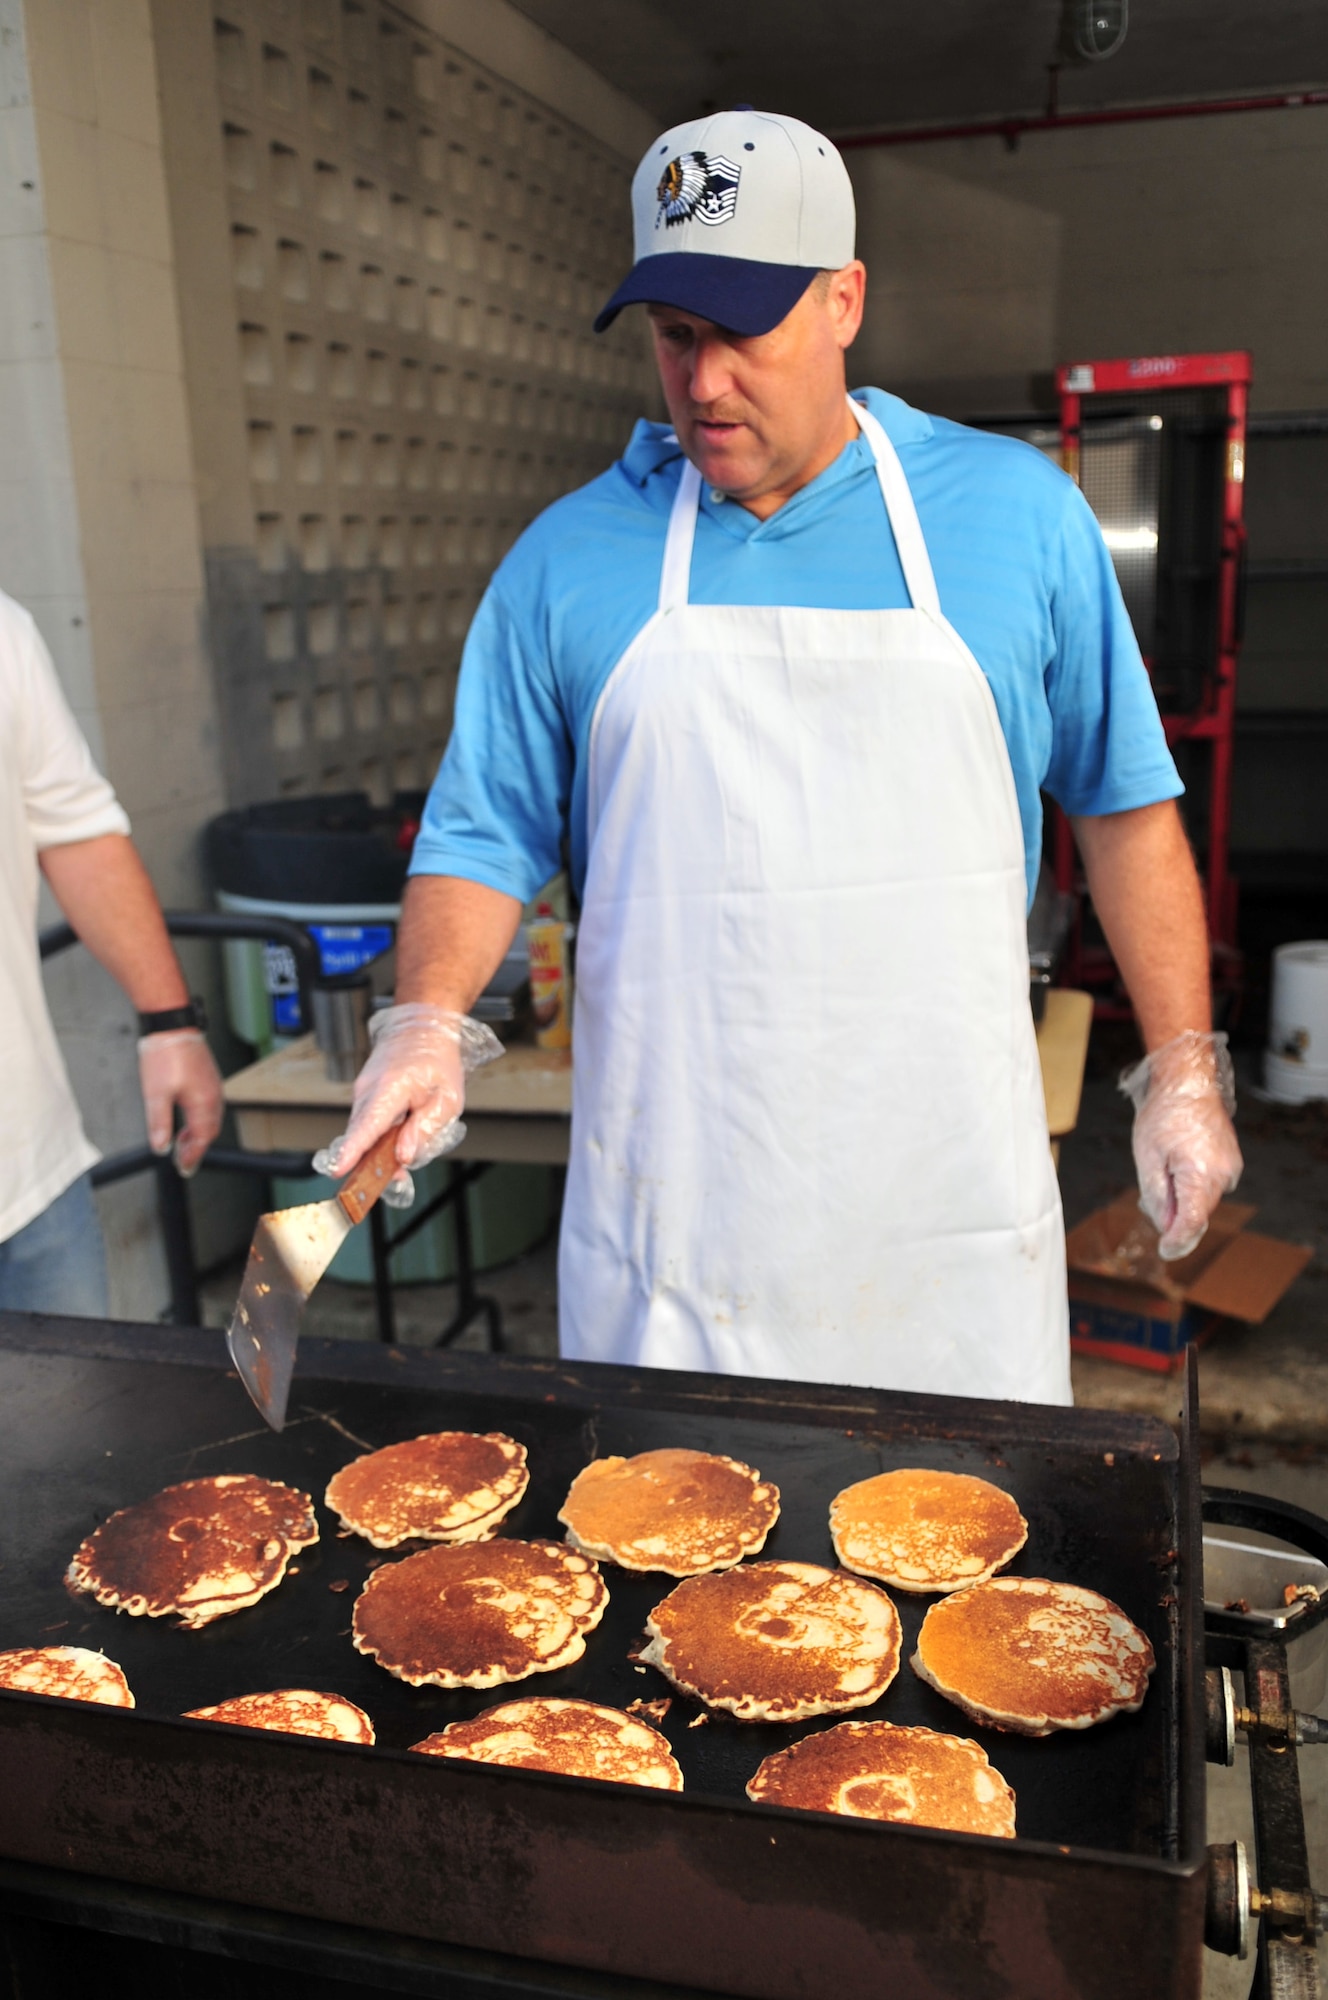 Senior Master Sgt. Brian Gilbert, 4th Maintenance Group chief, prepares pancakes for the Chief's Pancake Breakfast on Seymour Johnson Air Force Base, N.C., Nov. 20, 2009. Sergeant Gilbert was recently selected for promotion to Chief Master Sergeant. The entry fee of $5 covered all the pancakes, eggs and crepes a diner could eat. (U.S. Air Force photo/Airman 1st Class Rae Perry)